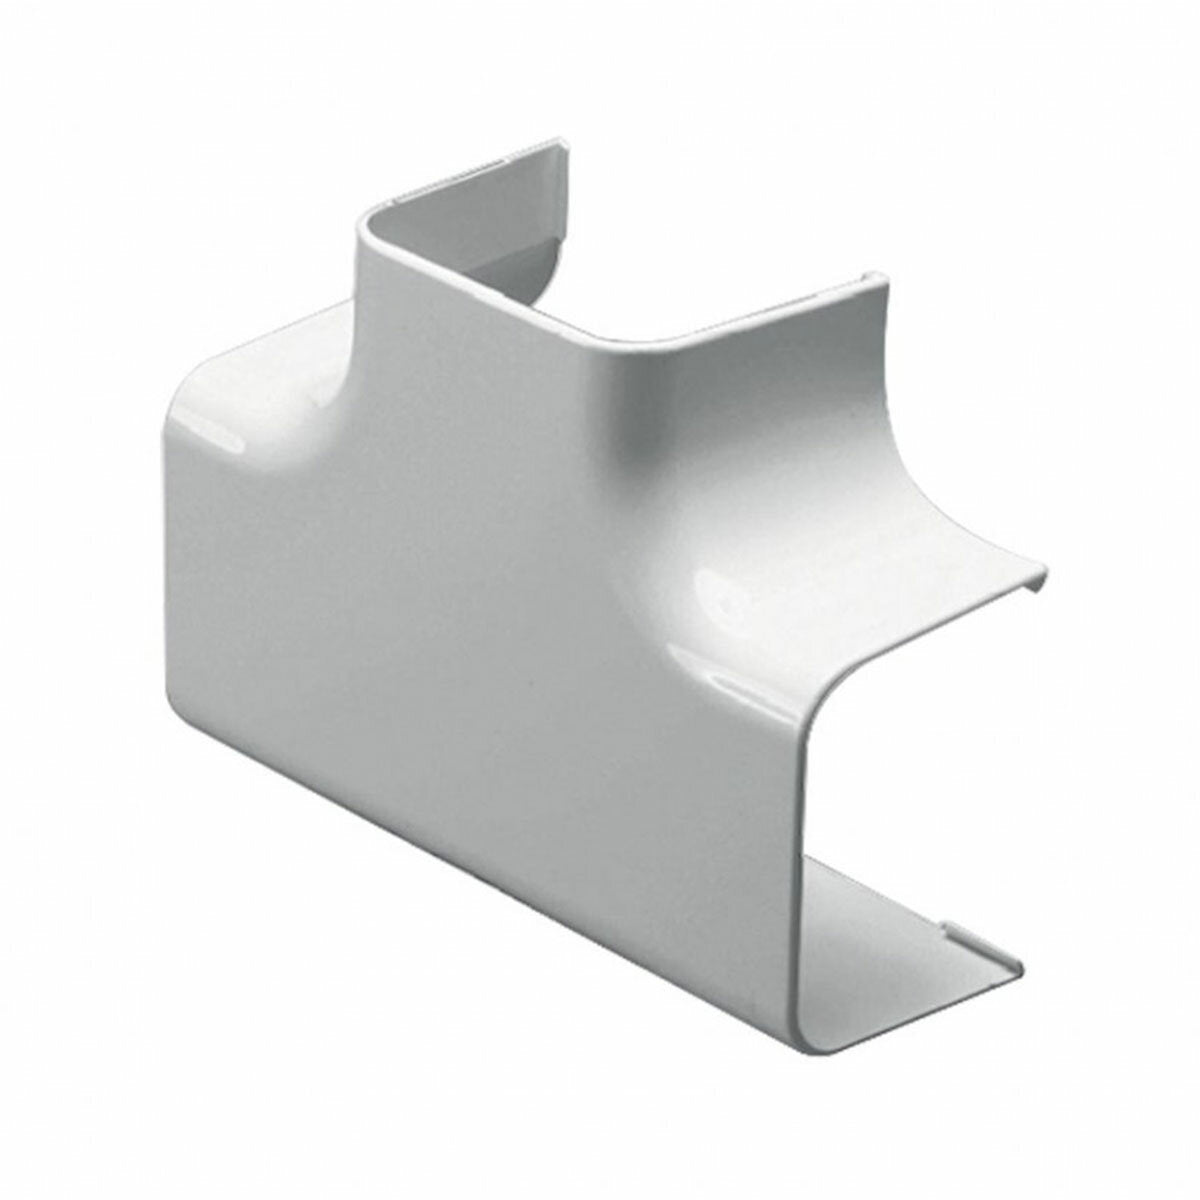 Niccons t-junction 80x60mm